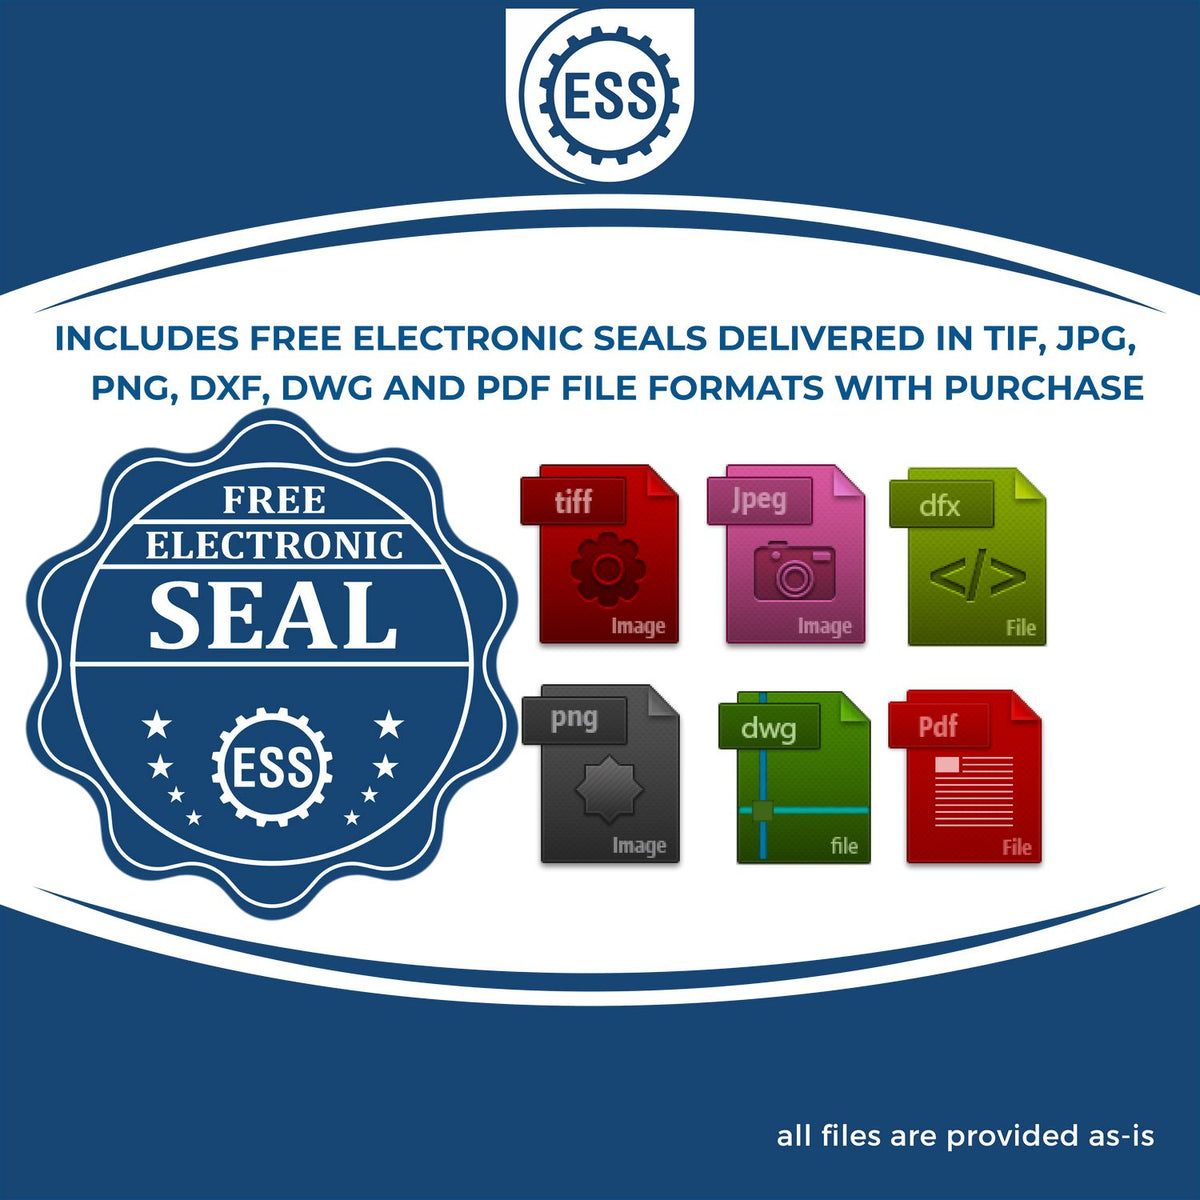 An infographic for the free electronic seal for the Gift Arizona Landscape Architect Seal illustrating the different file type icons such as DXF, DWG, TIF, JPG and PNG.